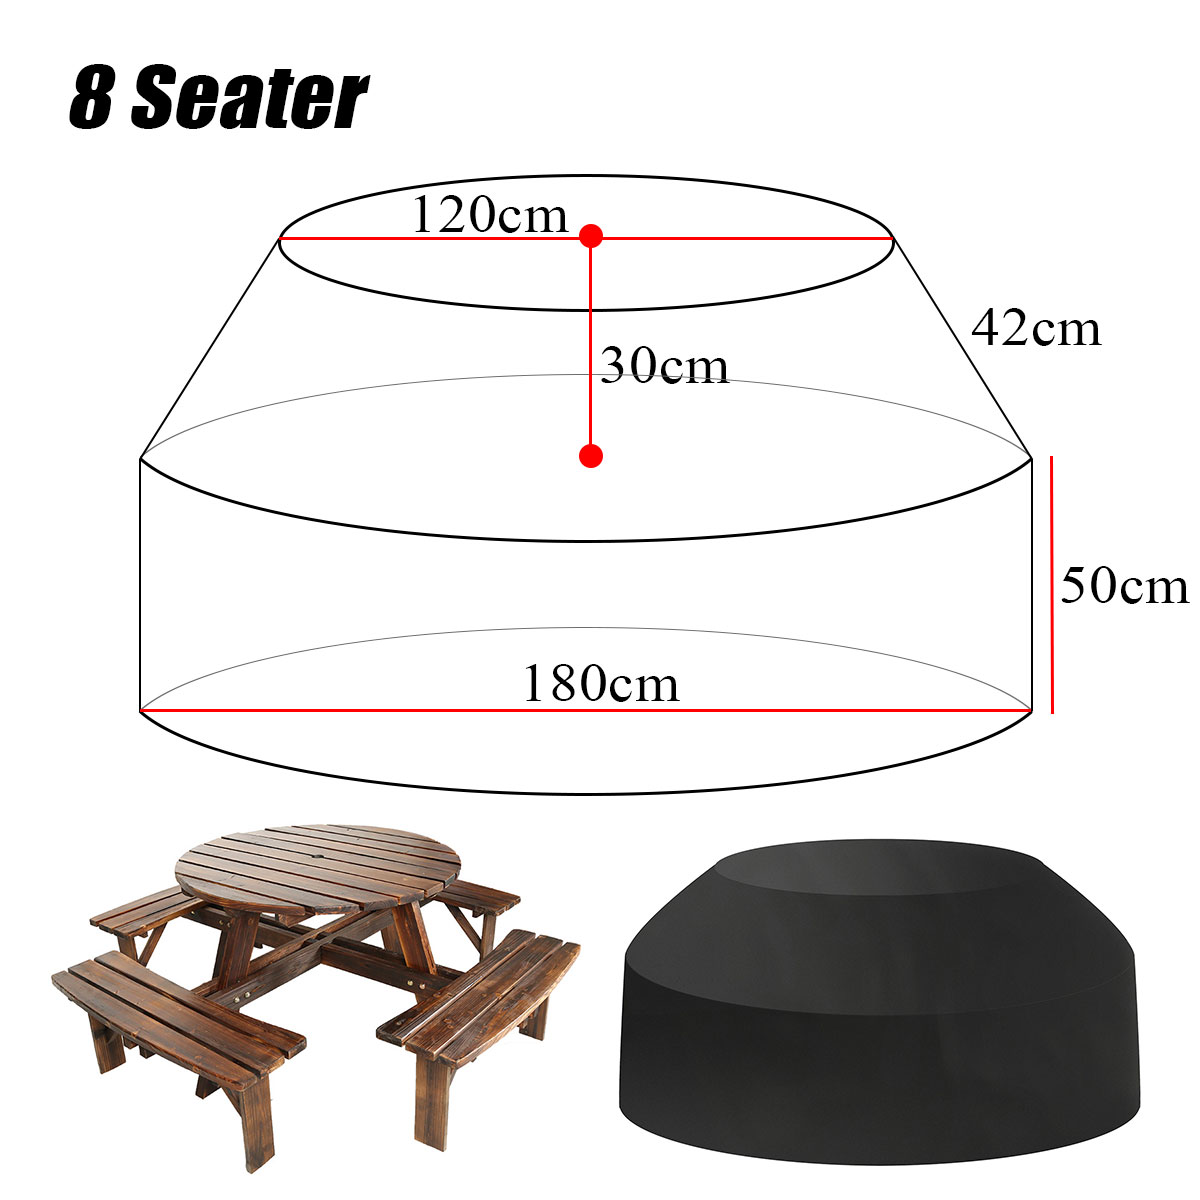 Dustproof Waterproof Cover Black for Outdoor 6/8 Seater round Tablecloth Home Picnic Table Motorcycle